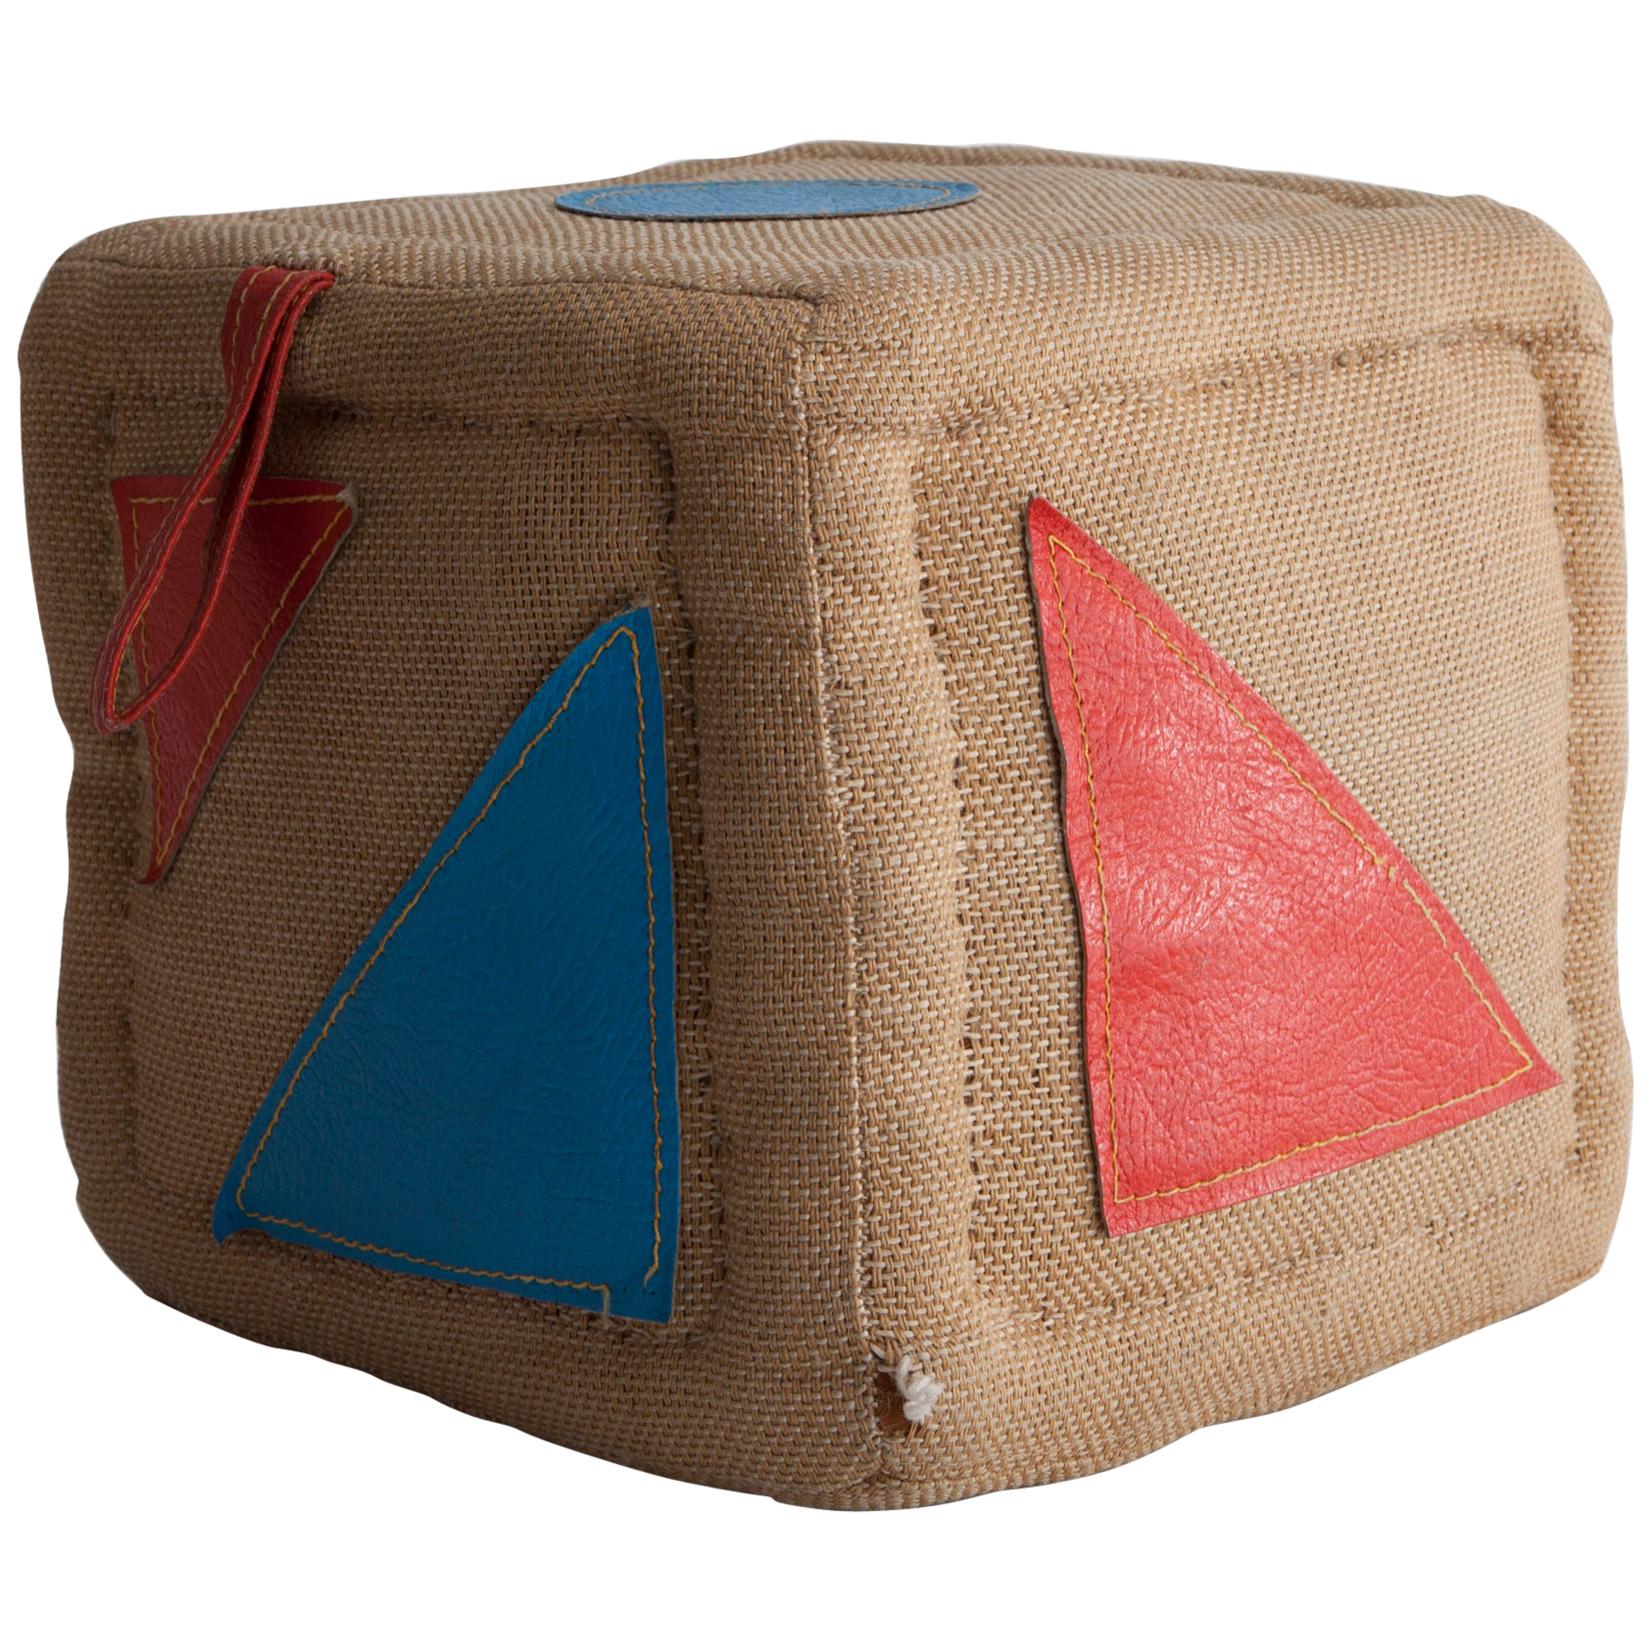 Therapeutic Toy Cube in Jute with Leather by Renate Müller, 1968-1974 For Sale